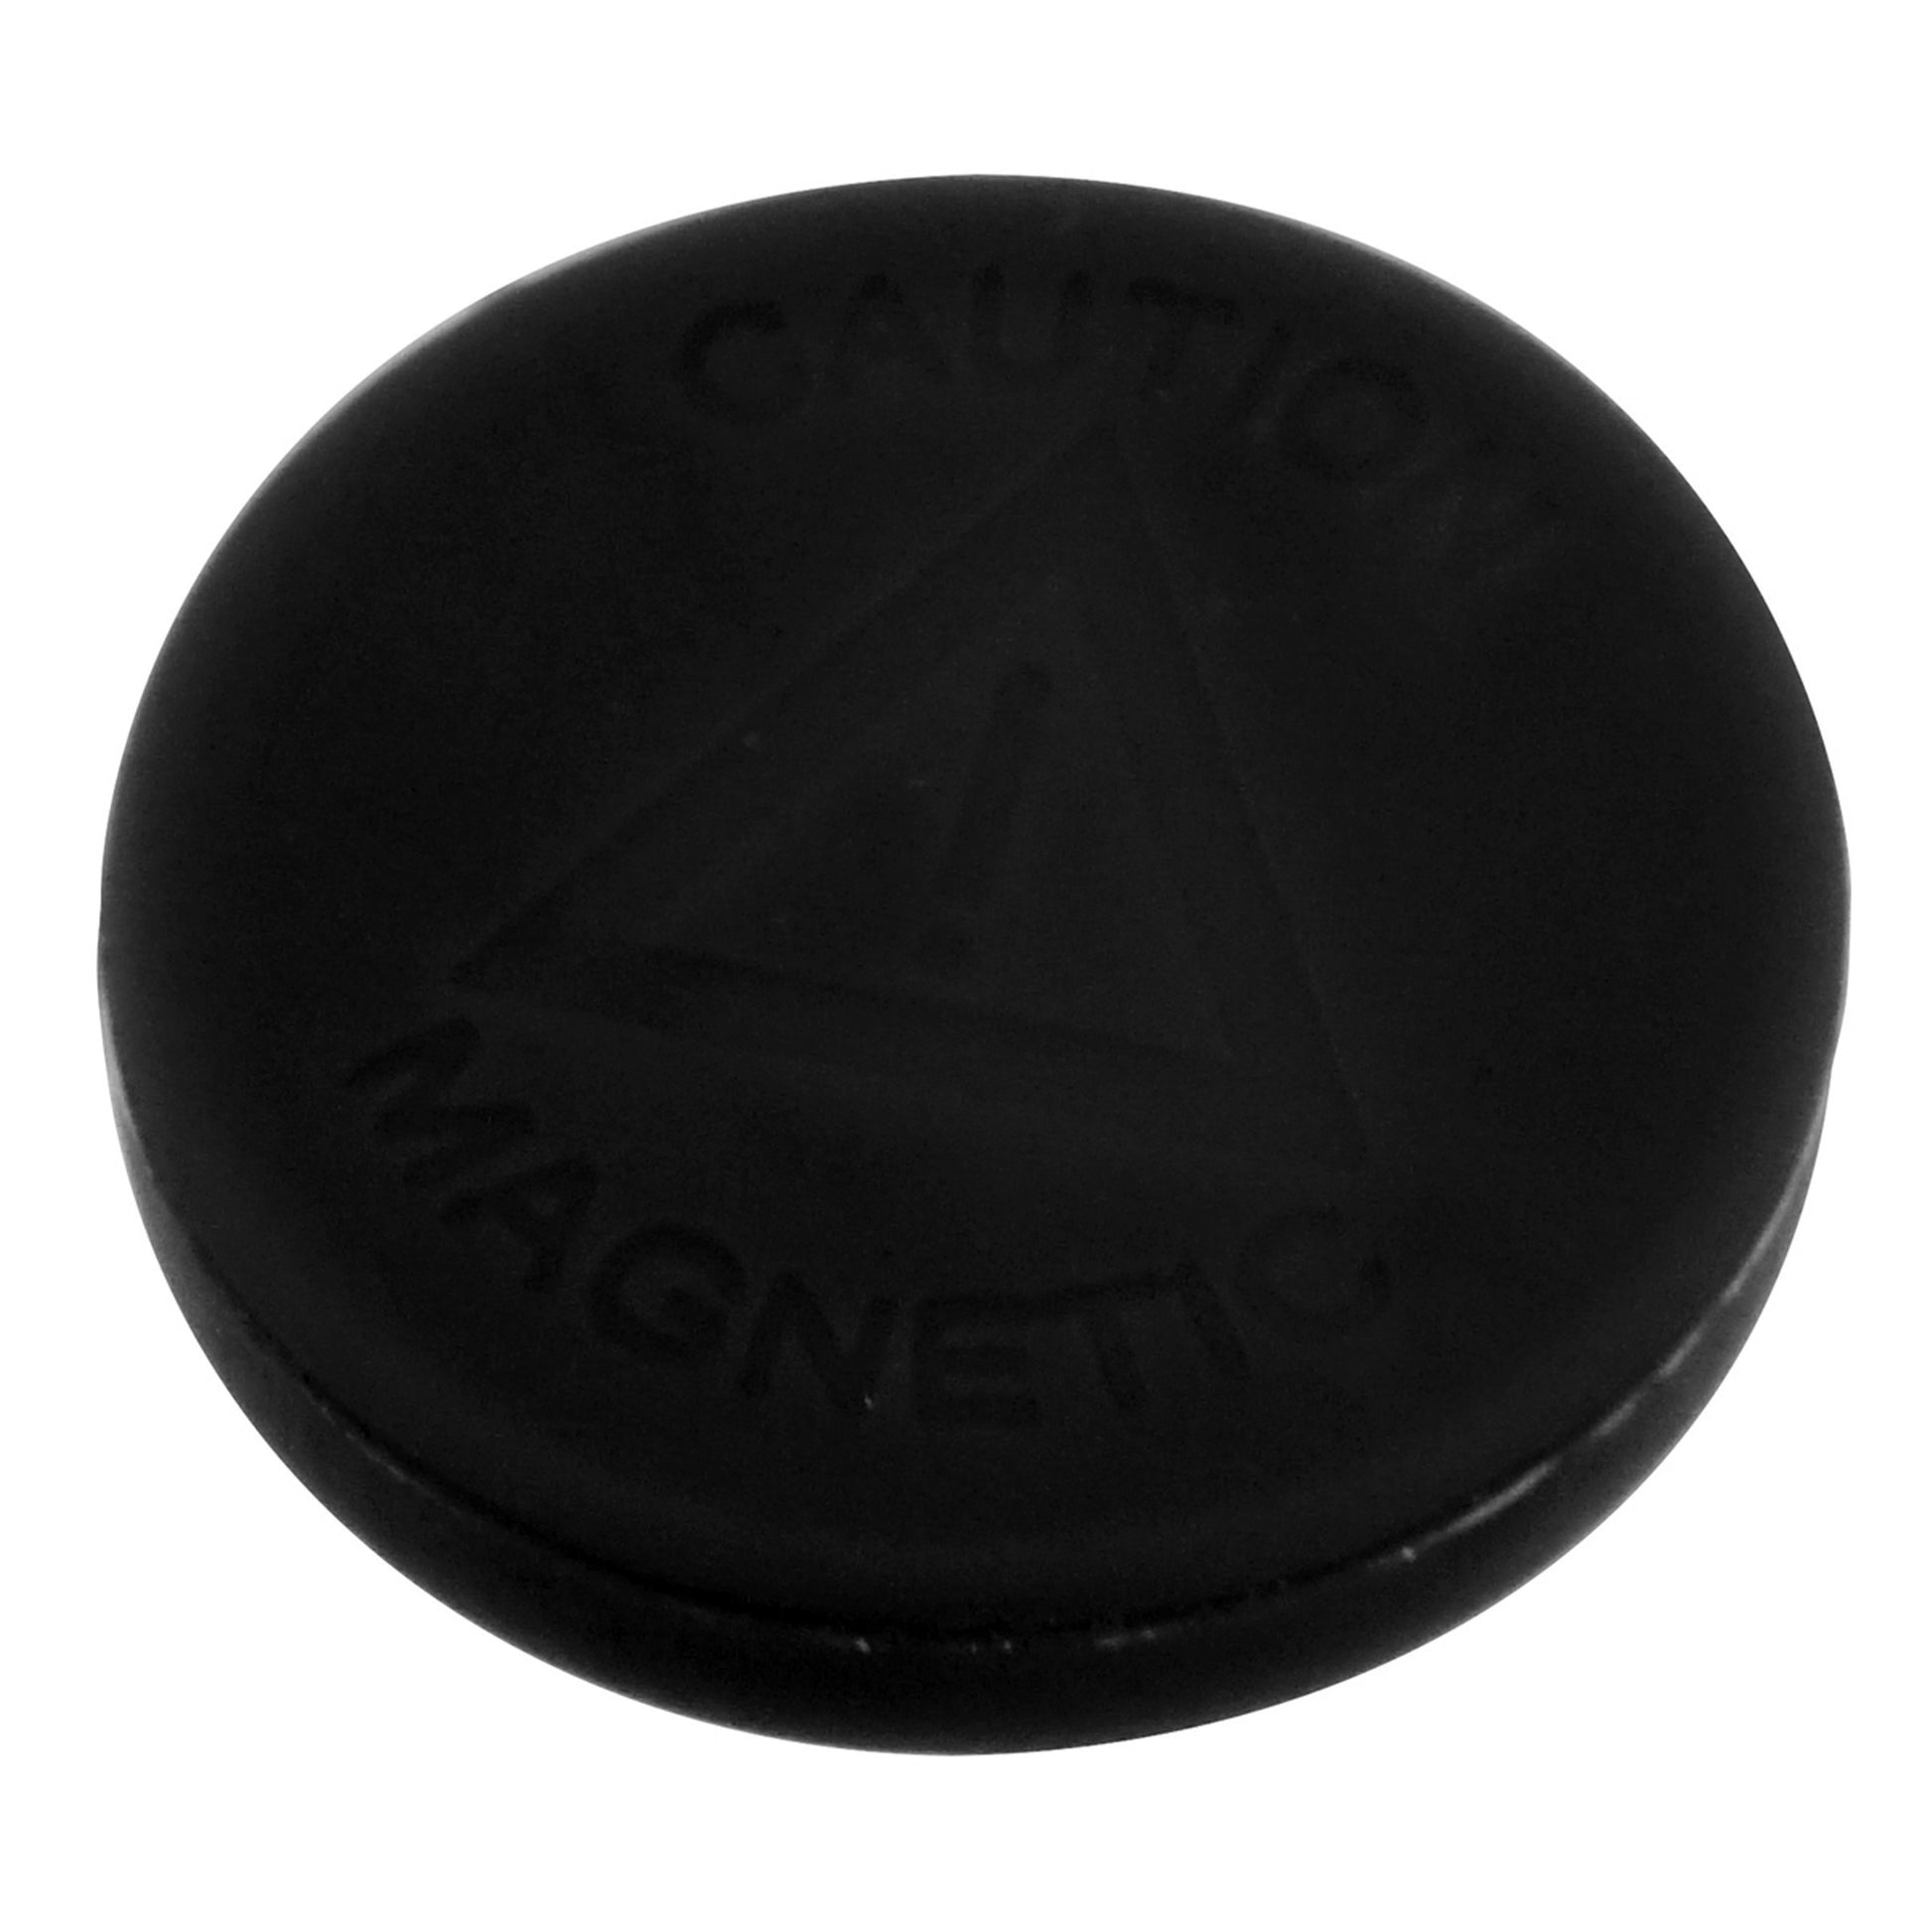 Load image into Gallery viewer, SND100BK Neodymium Silicone-Covered Disc Magnet - 45 Degree Angle View